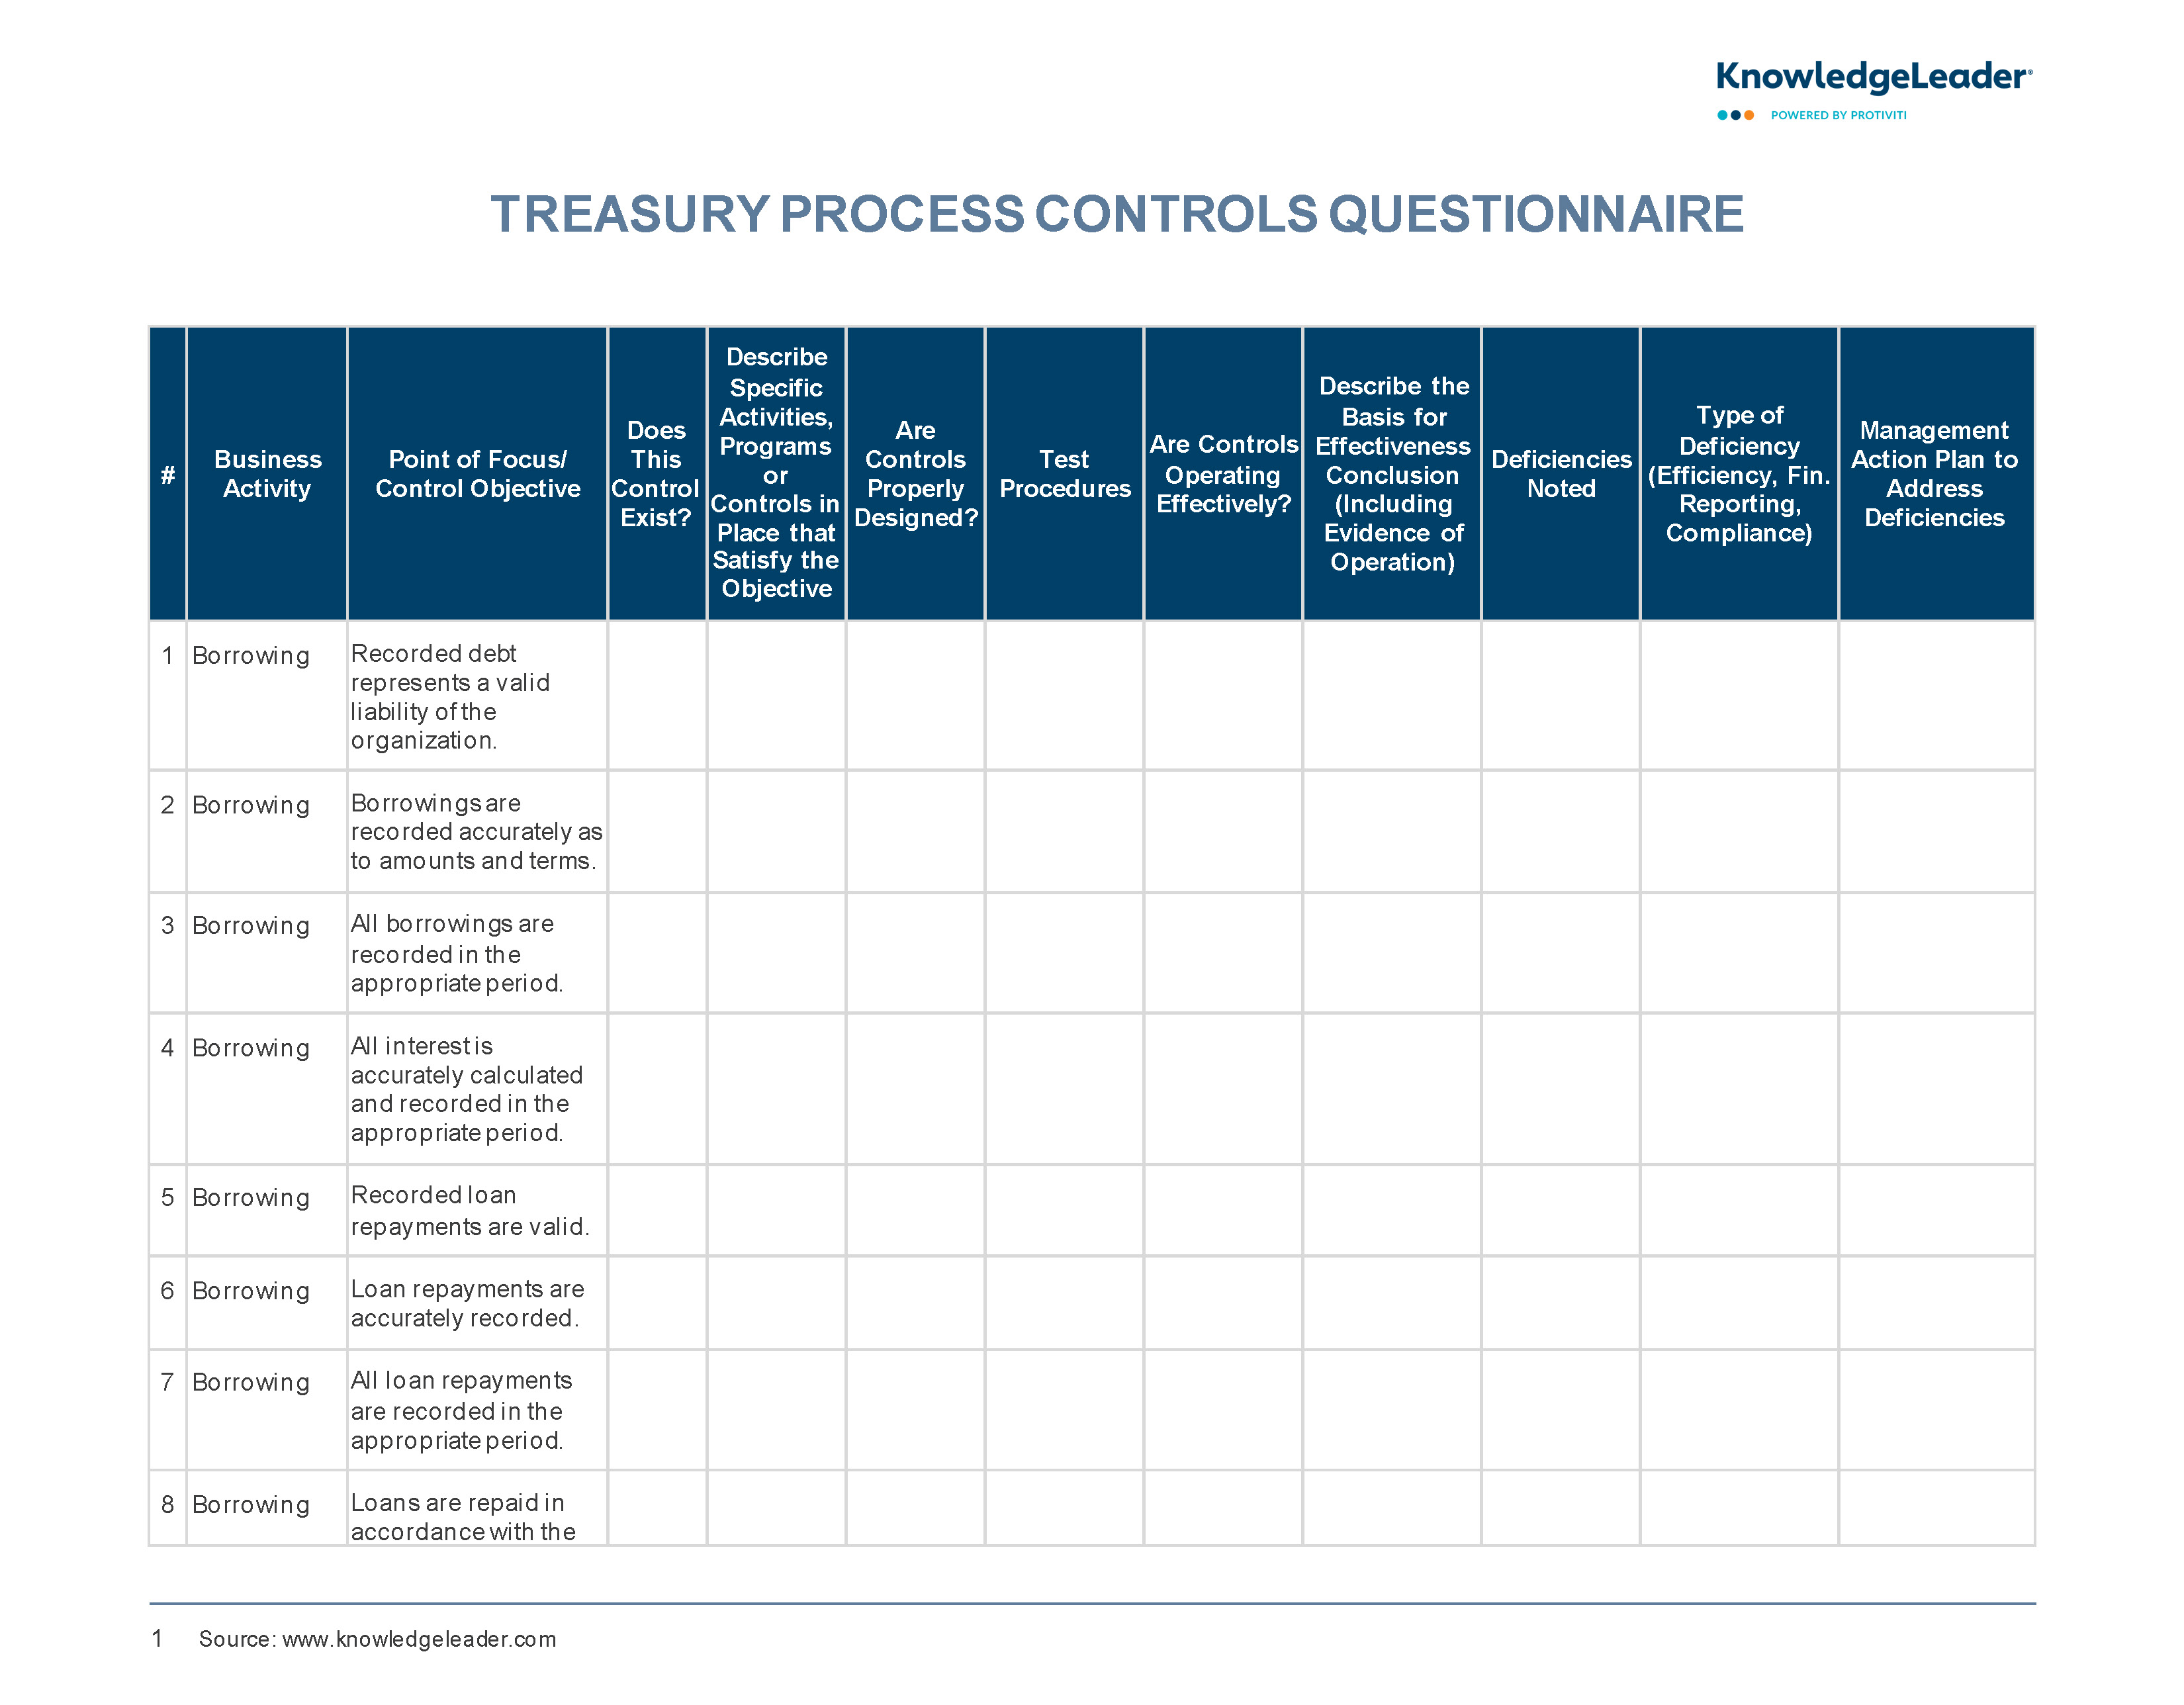 Screenshot of the first page of Treasury Process Controls Questionnaire